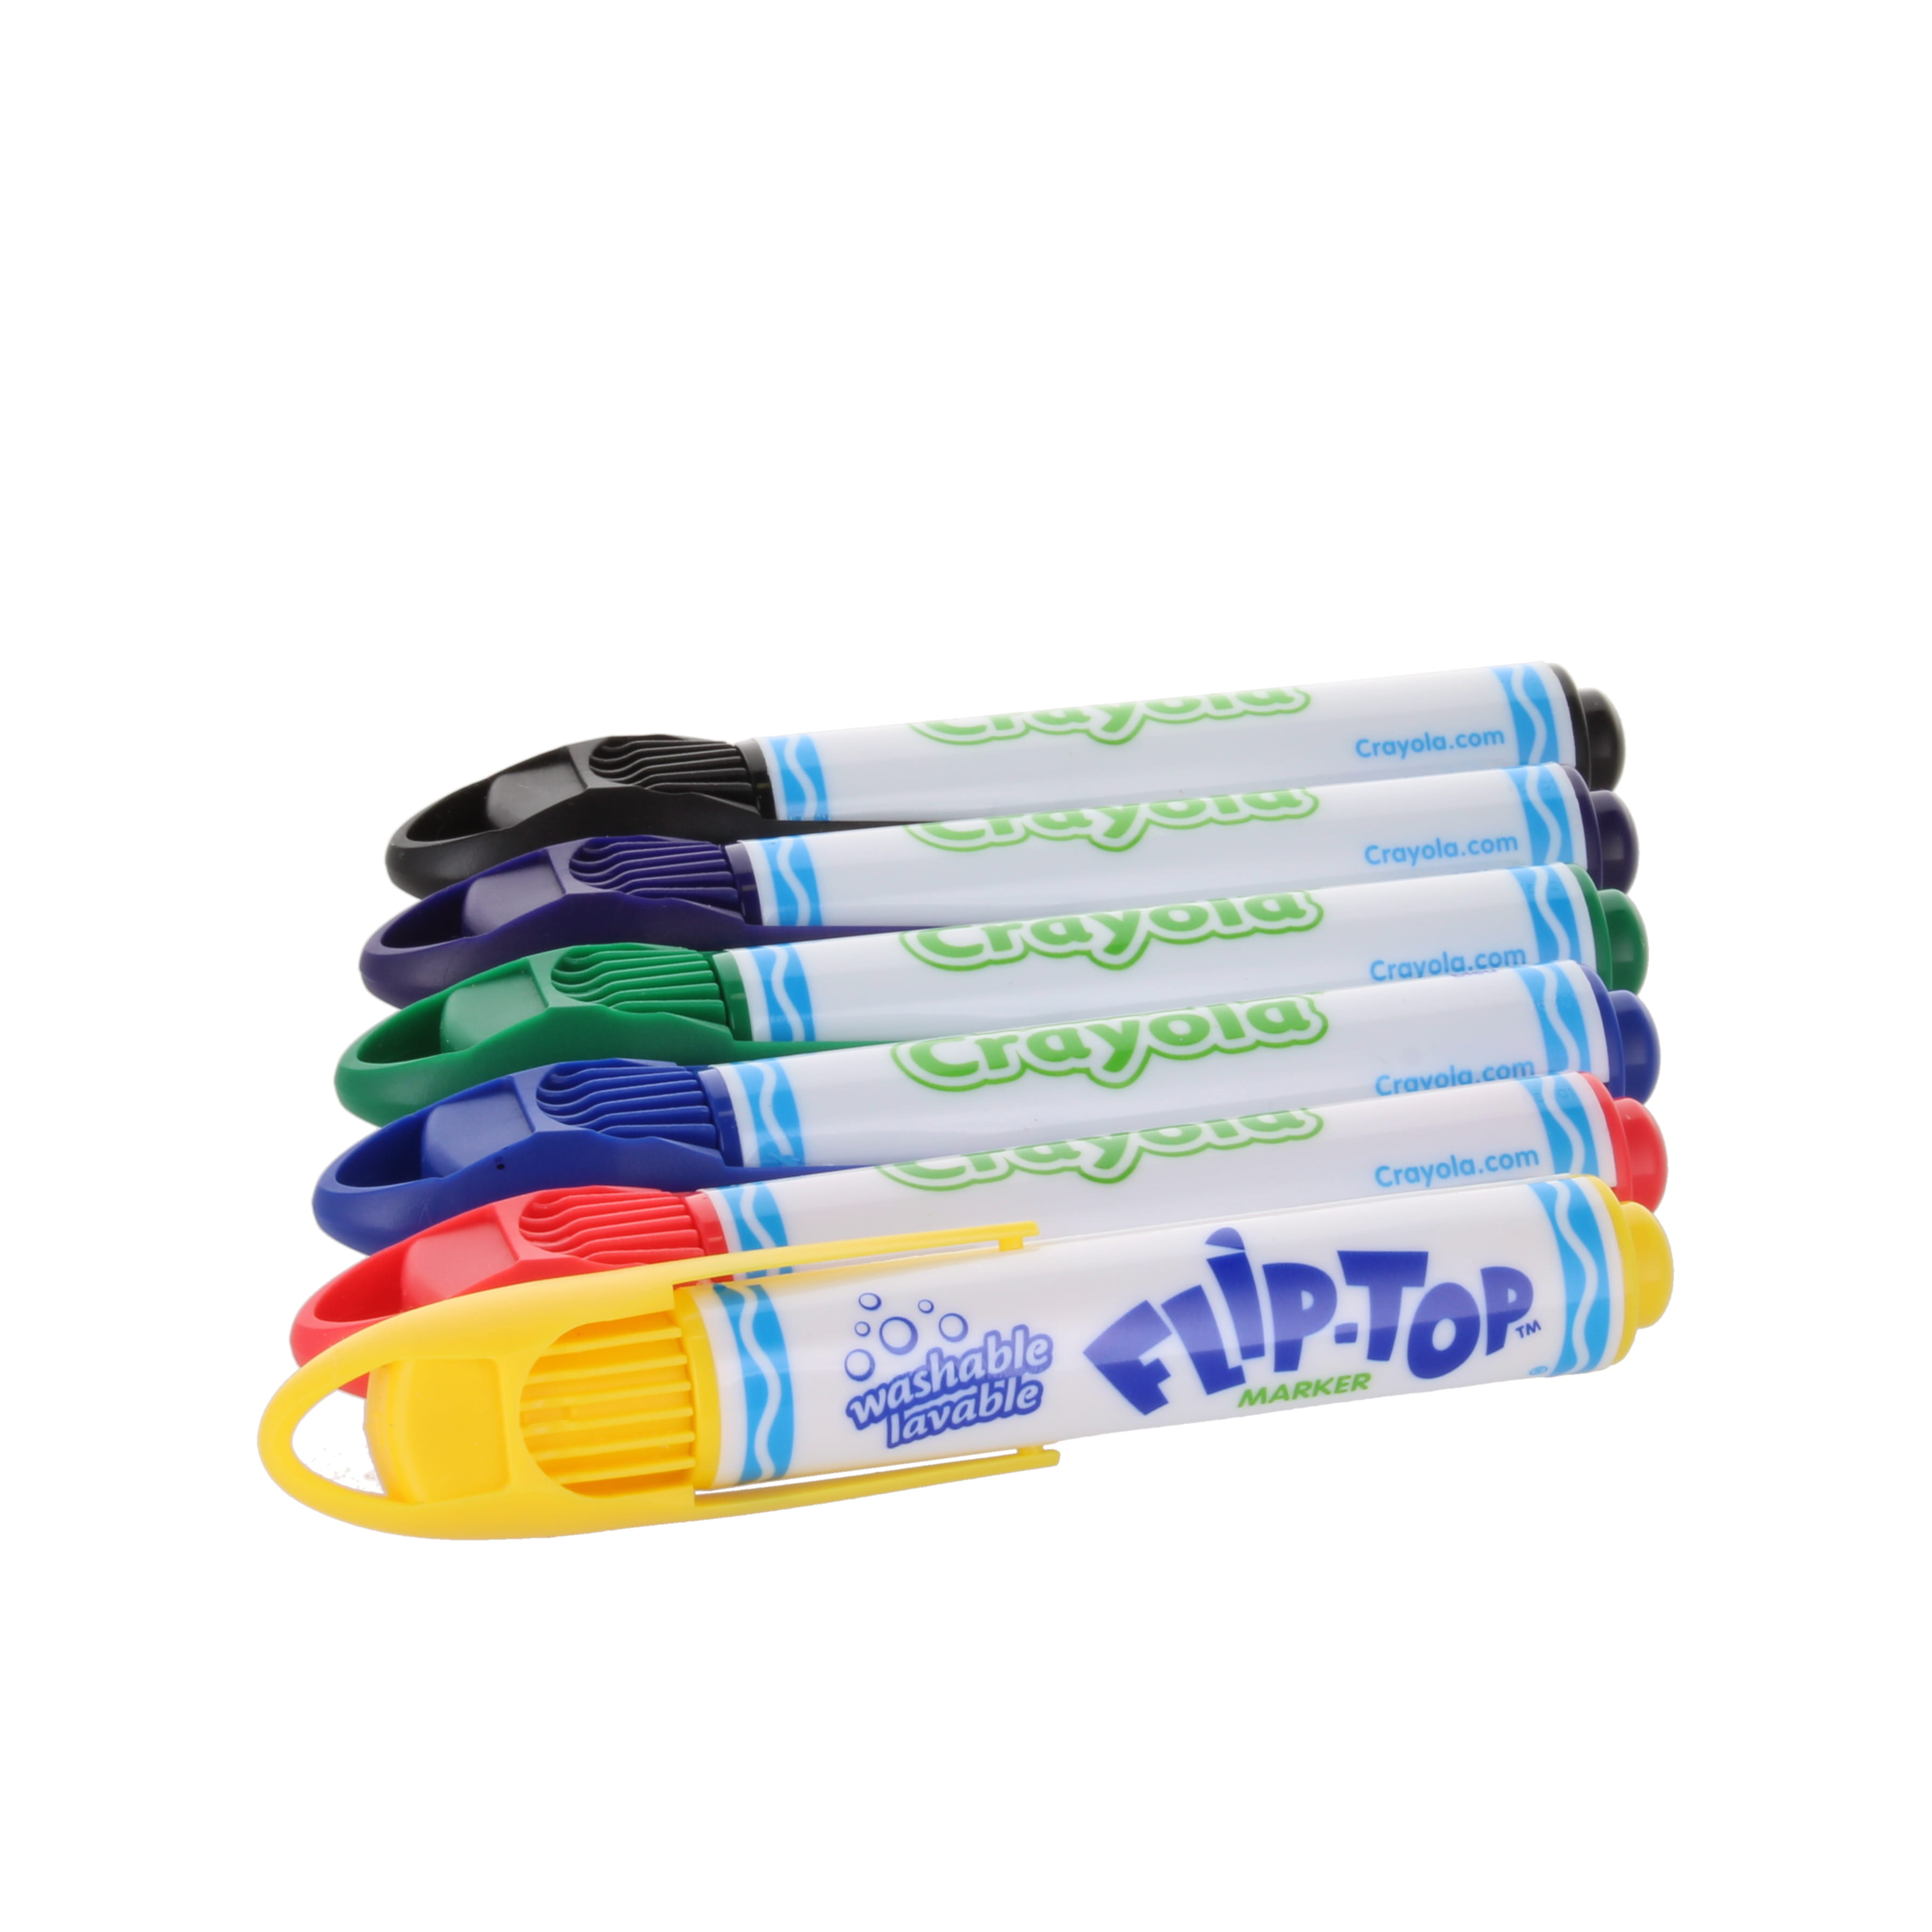 Crayola Flip Top Colouring Pens - pack of 6 - STG32